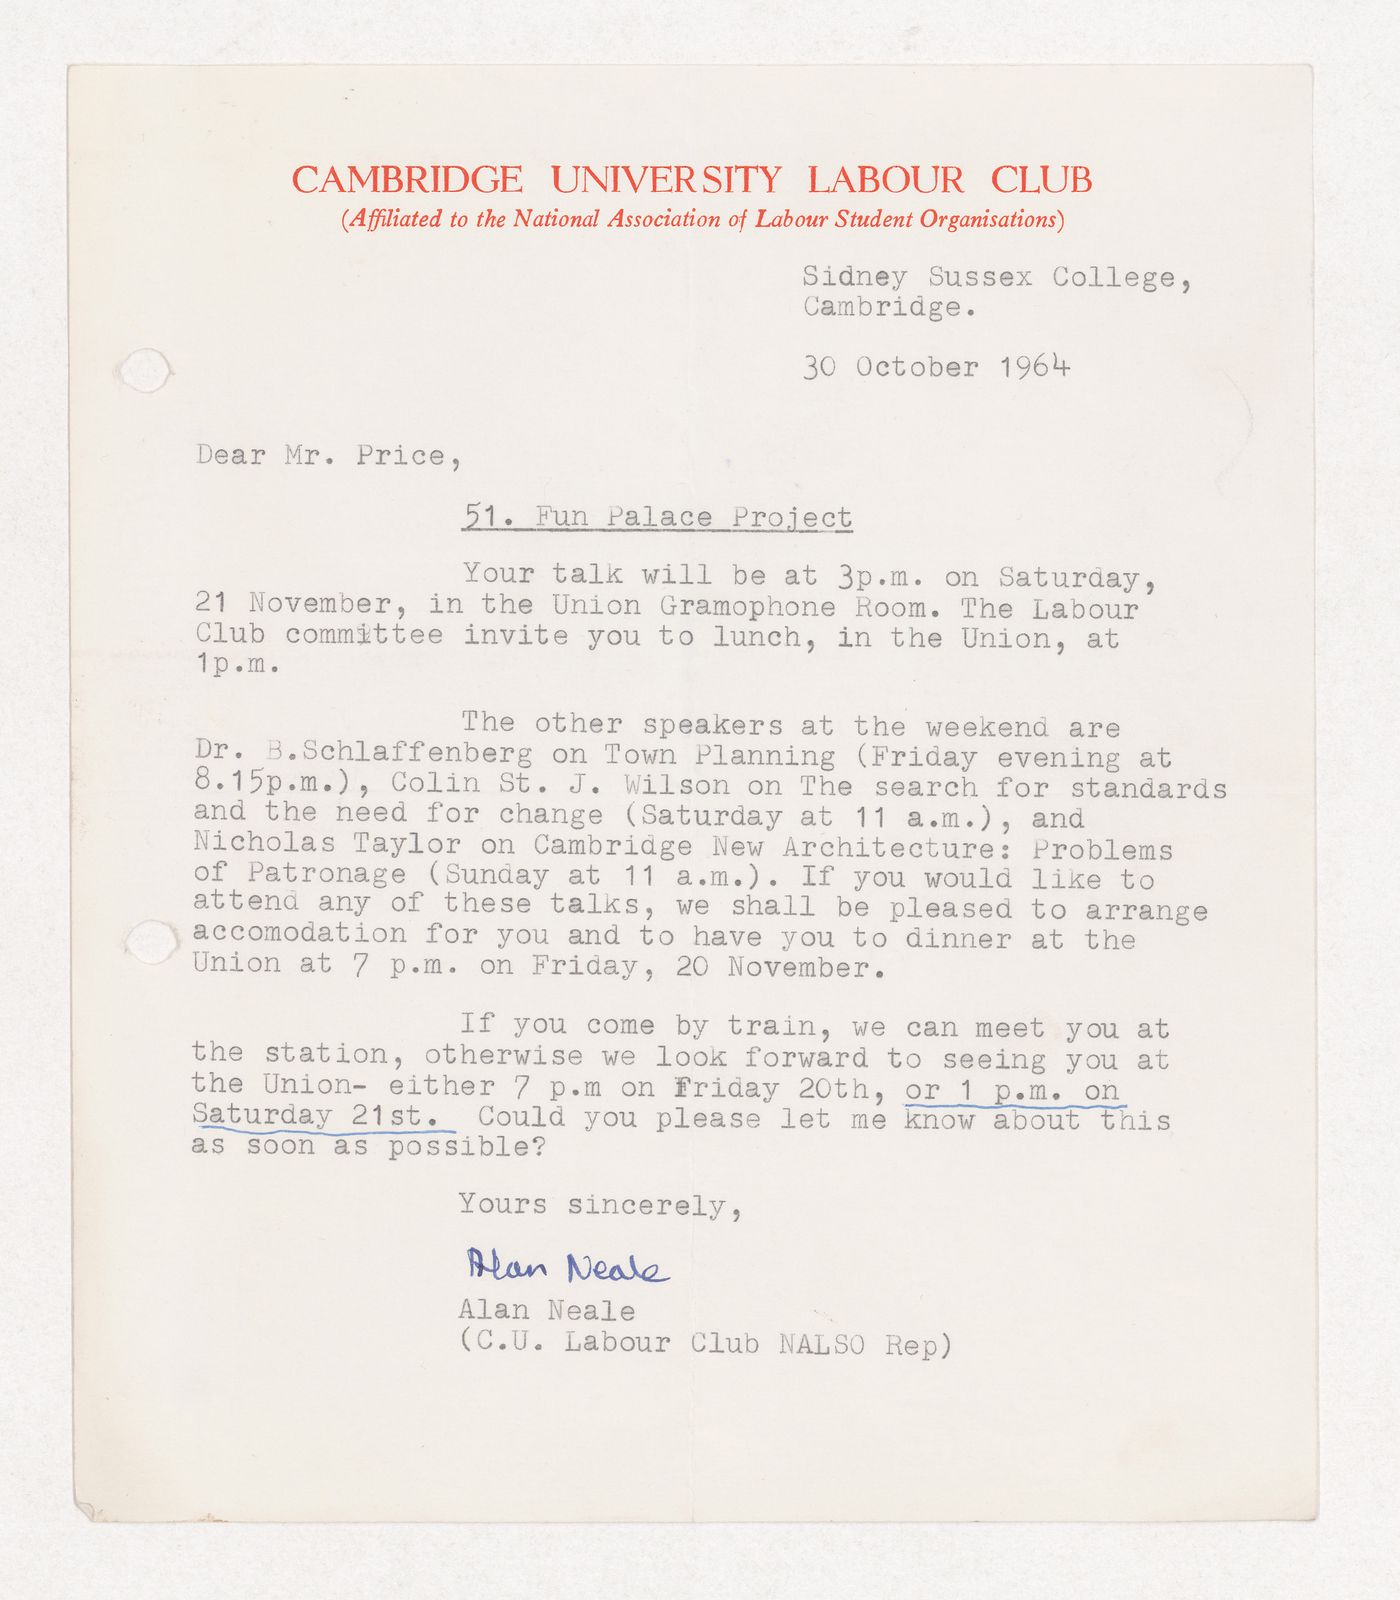 Letter from Alan Neale of the Cambridge University Labour Club to Cedric Price regarding an upcoming speaking engagement